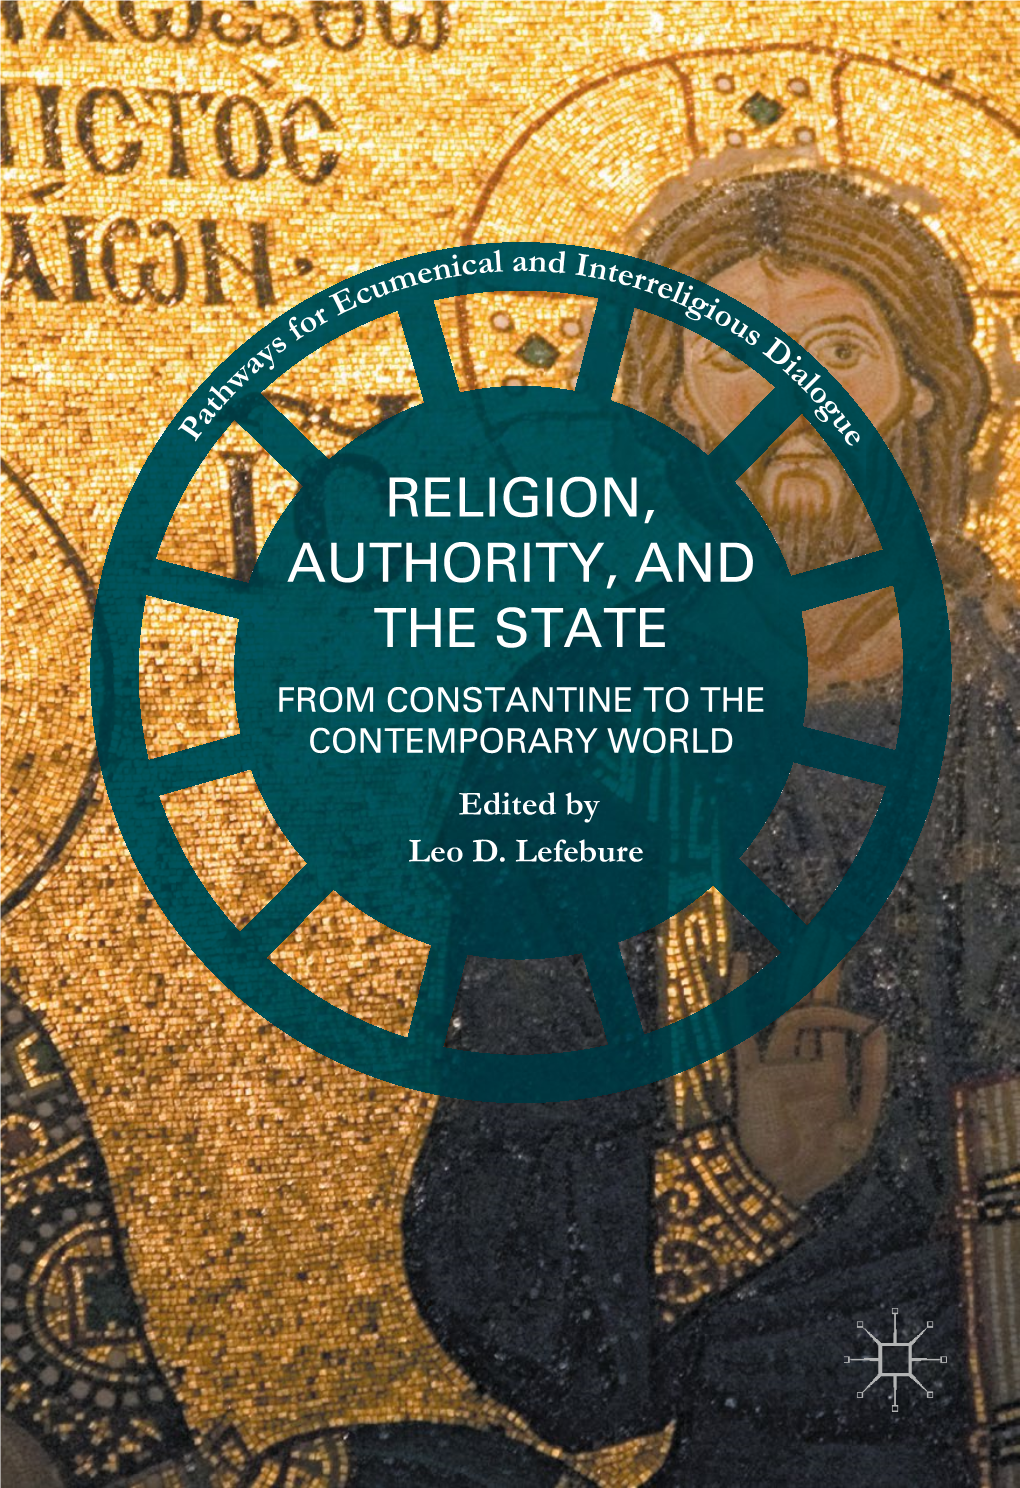 RELIGION, AUTHORITY, and the STATE from CONSTANTINE to the CONTEMPORARY WORLD Edited by Leo D